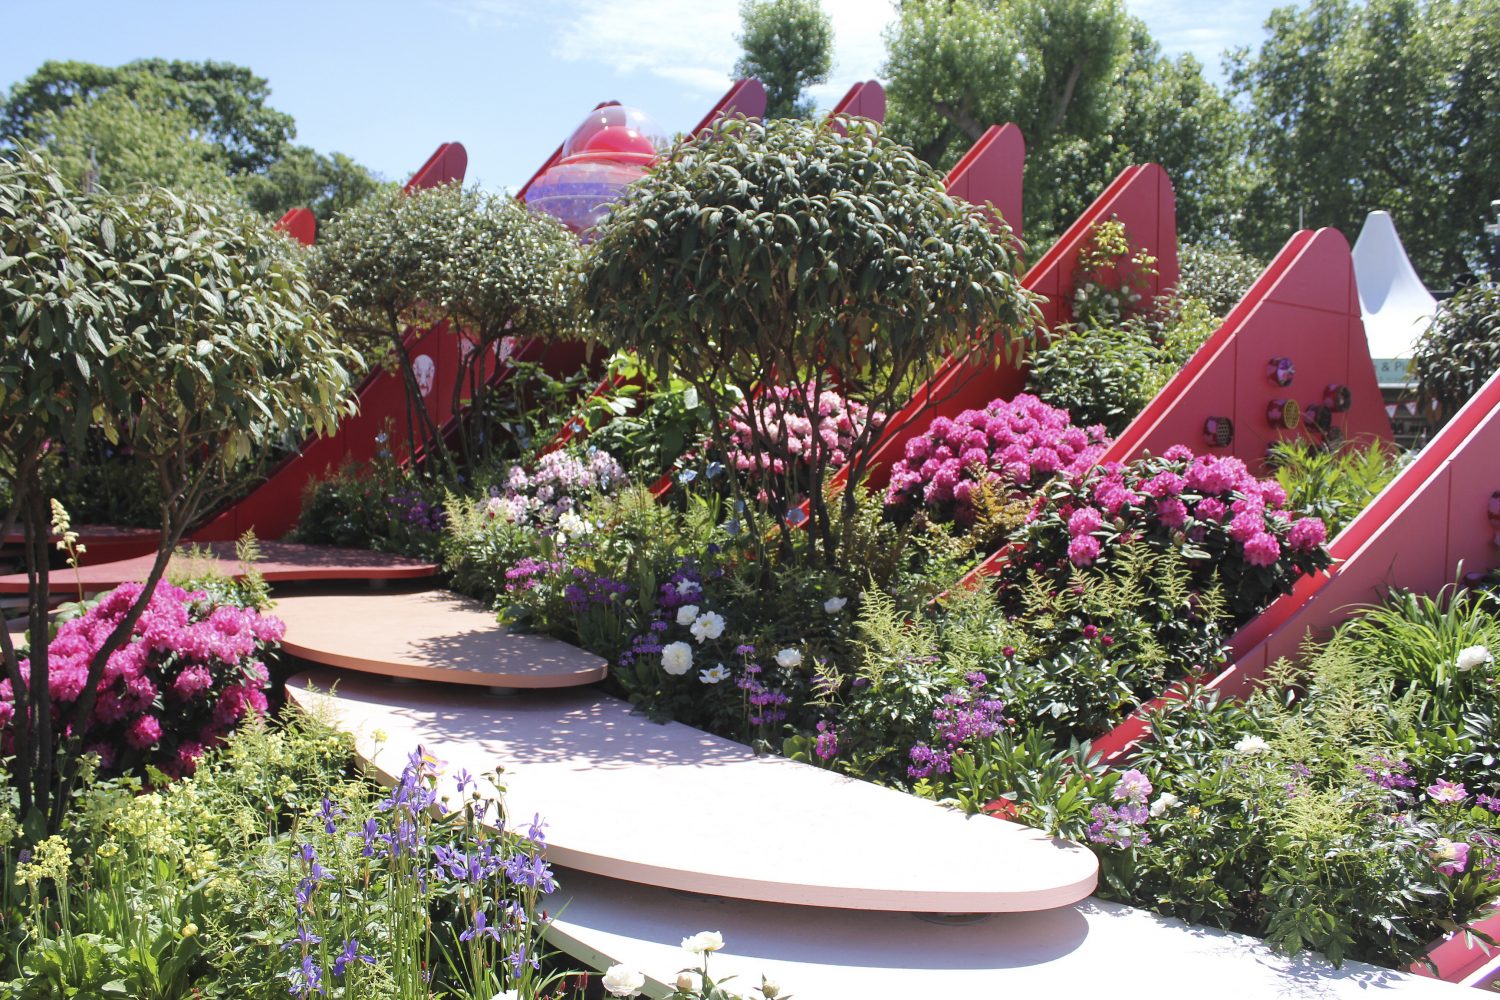 More show gardens from the Chelsea Flower Show